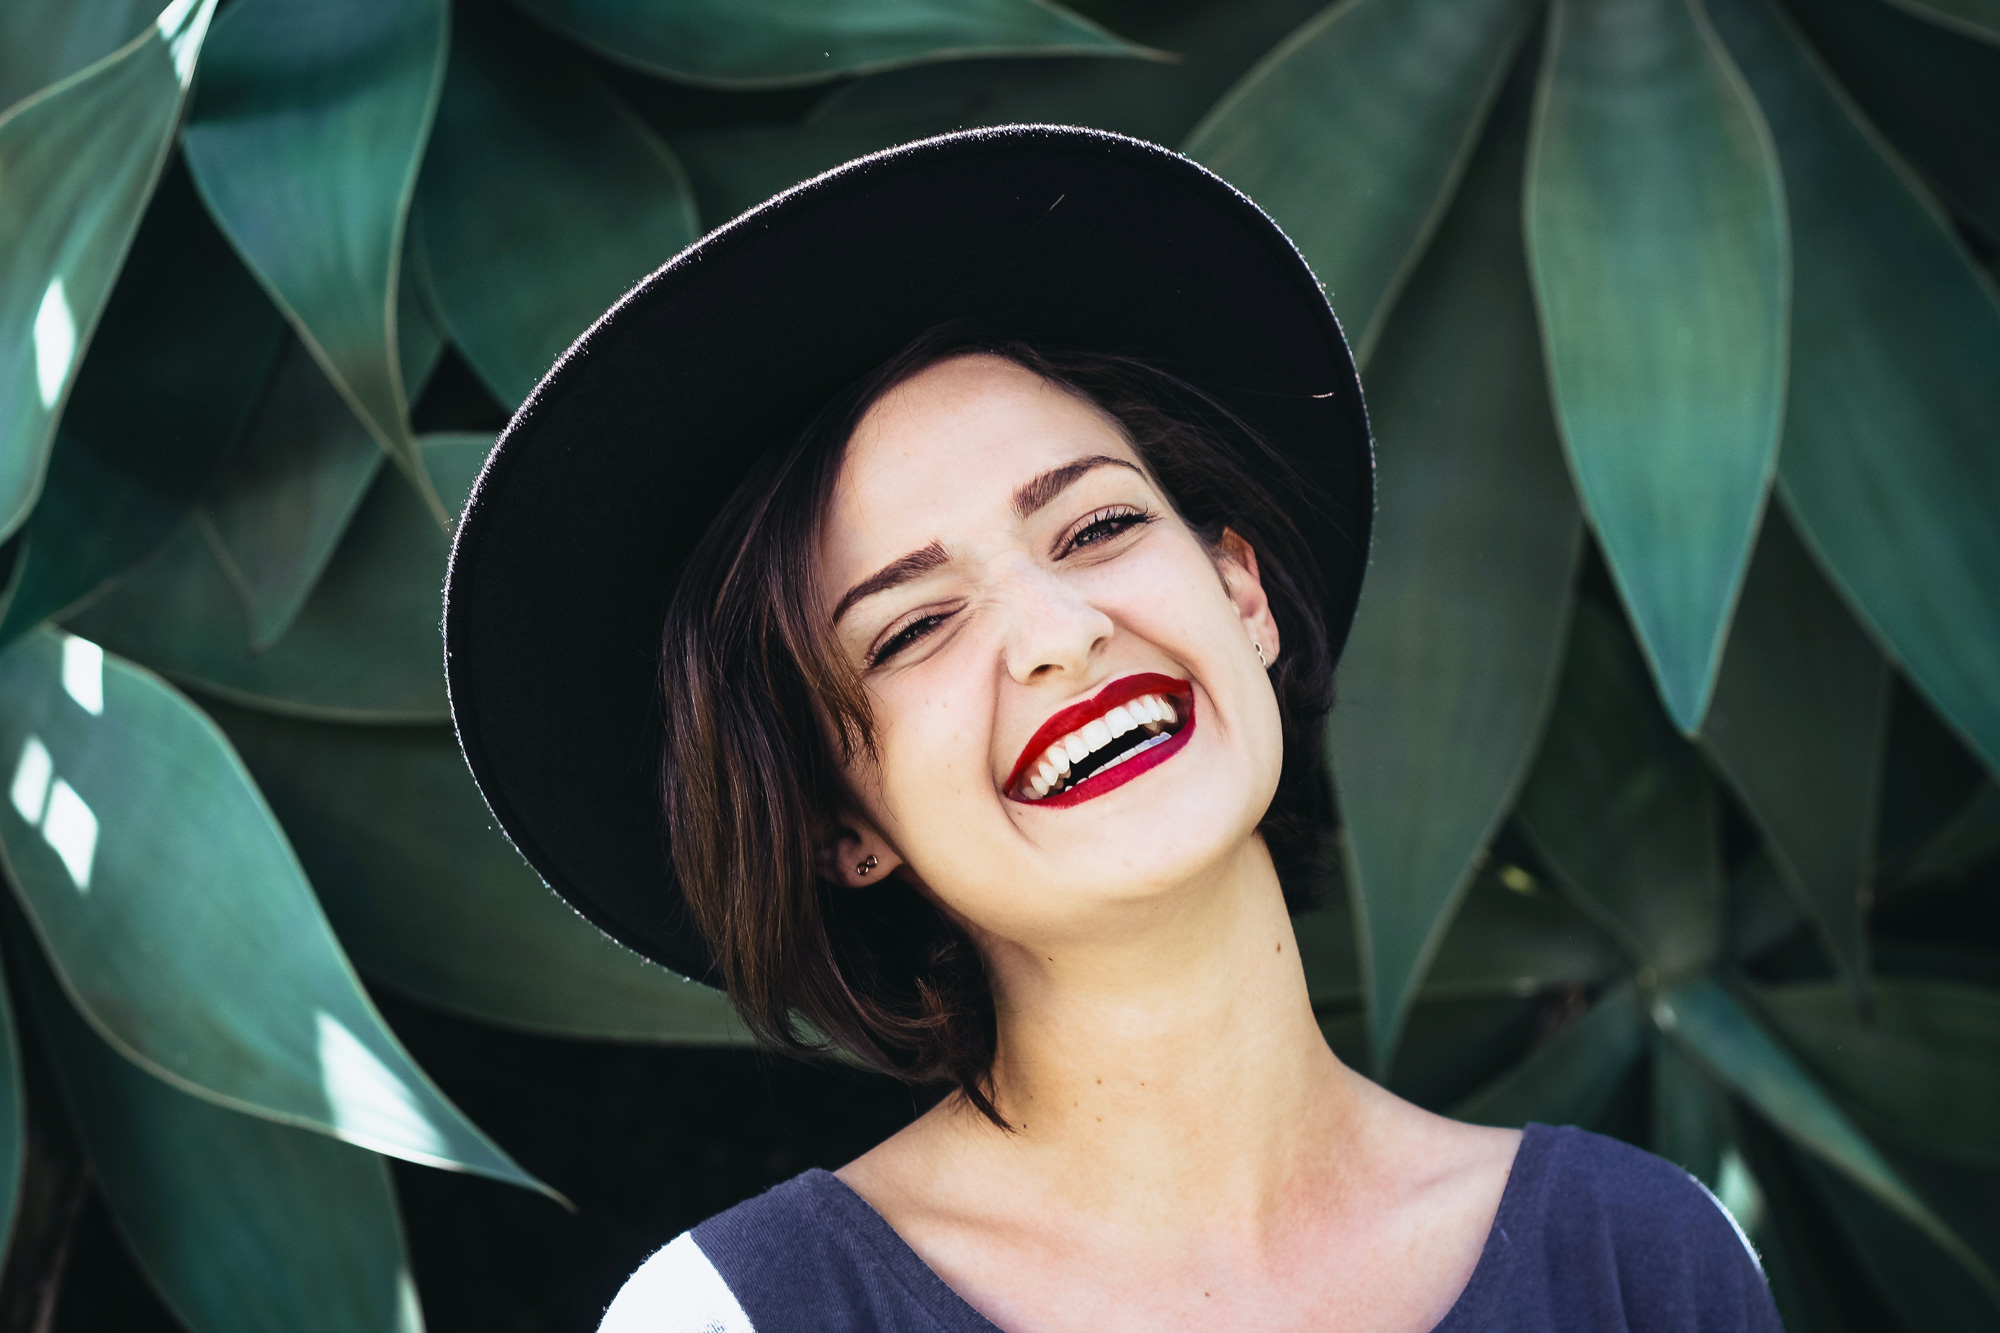 woman wearing a hat and red lipstick smiling